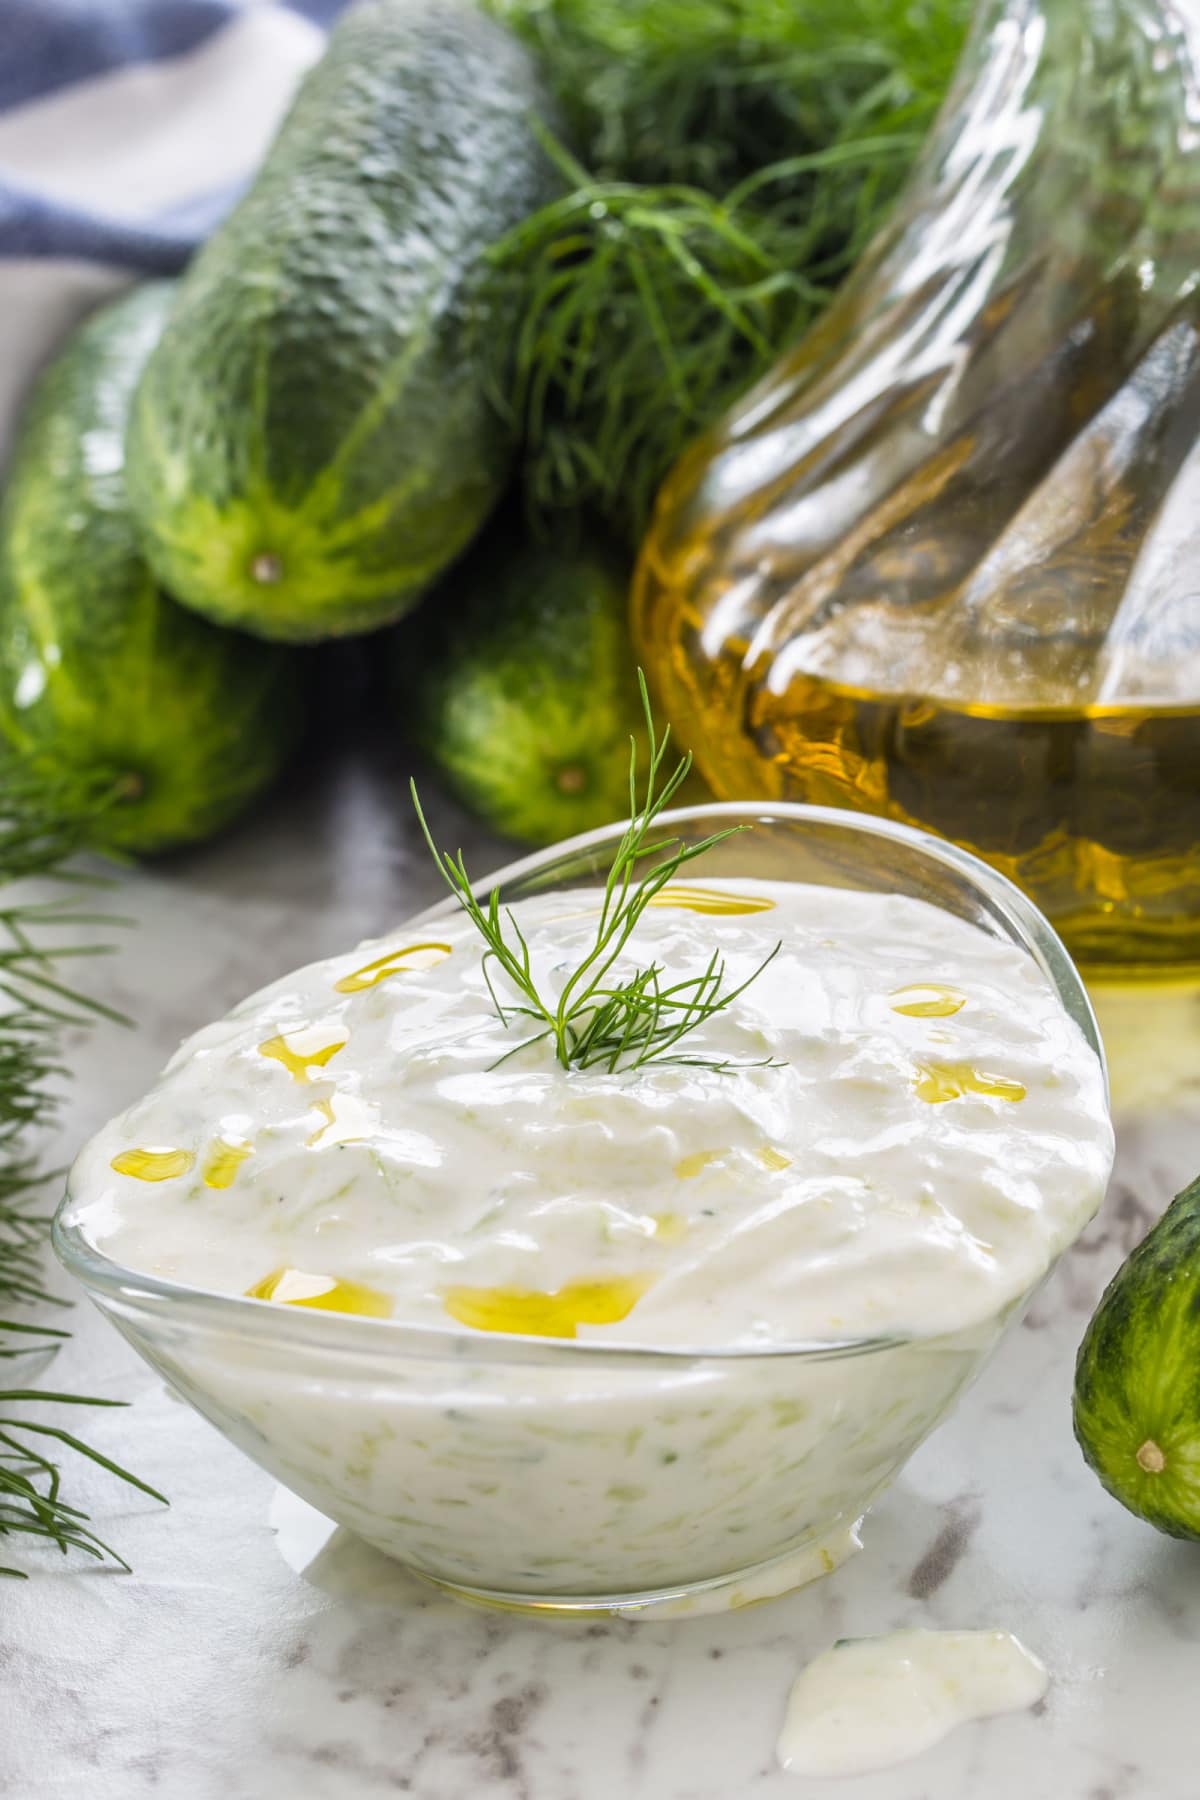 Boat shaped glass bowl overflowing with tzatziki sauce garnished with fresh dill leaves and drizzle of olive oil.